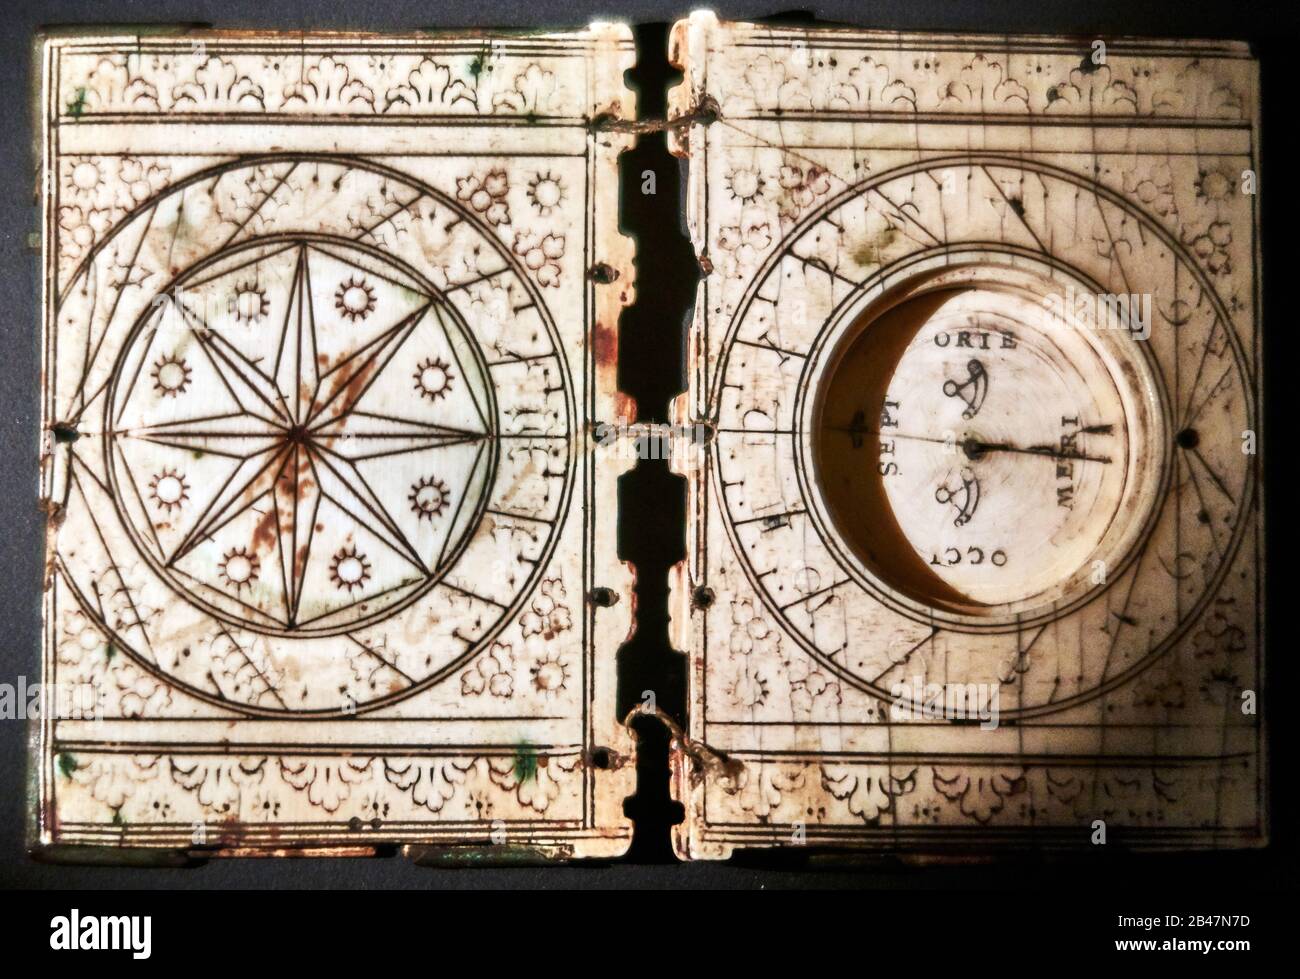 Reykjavik, The National Museum of Iceland, compass and sundial in ivory 16eme century German or Spanish possibly brought there by foreign sailors Stock Photo